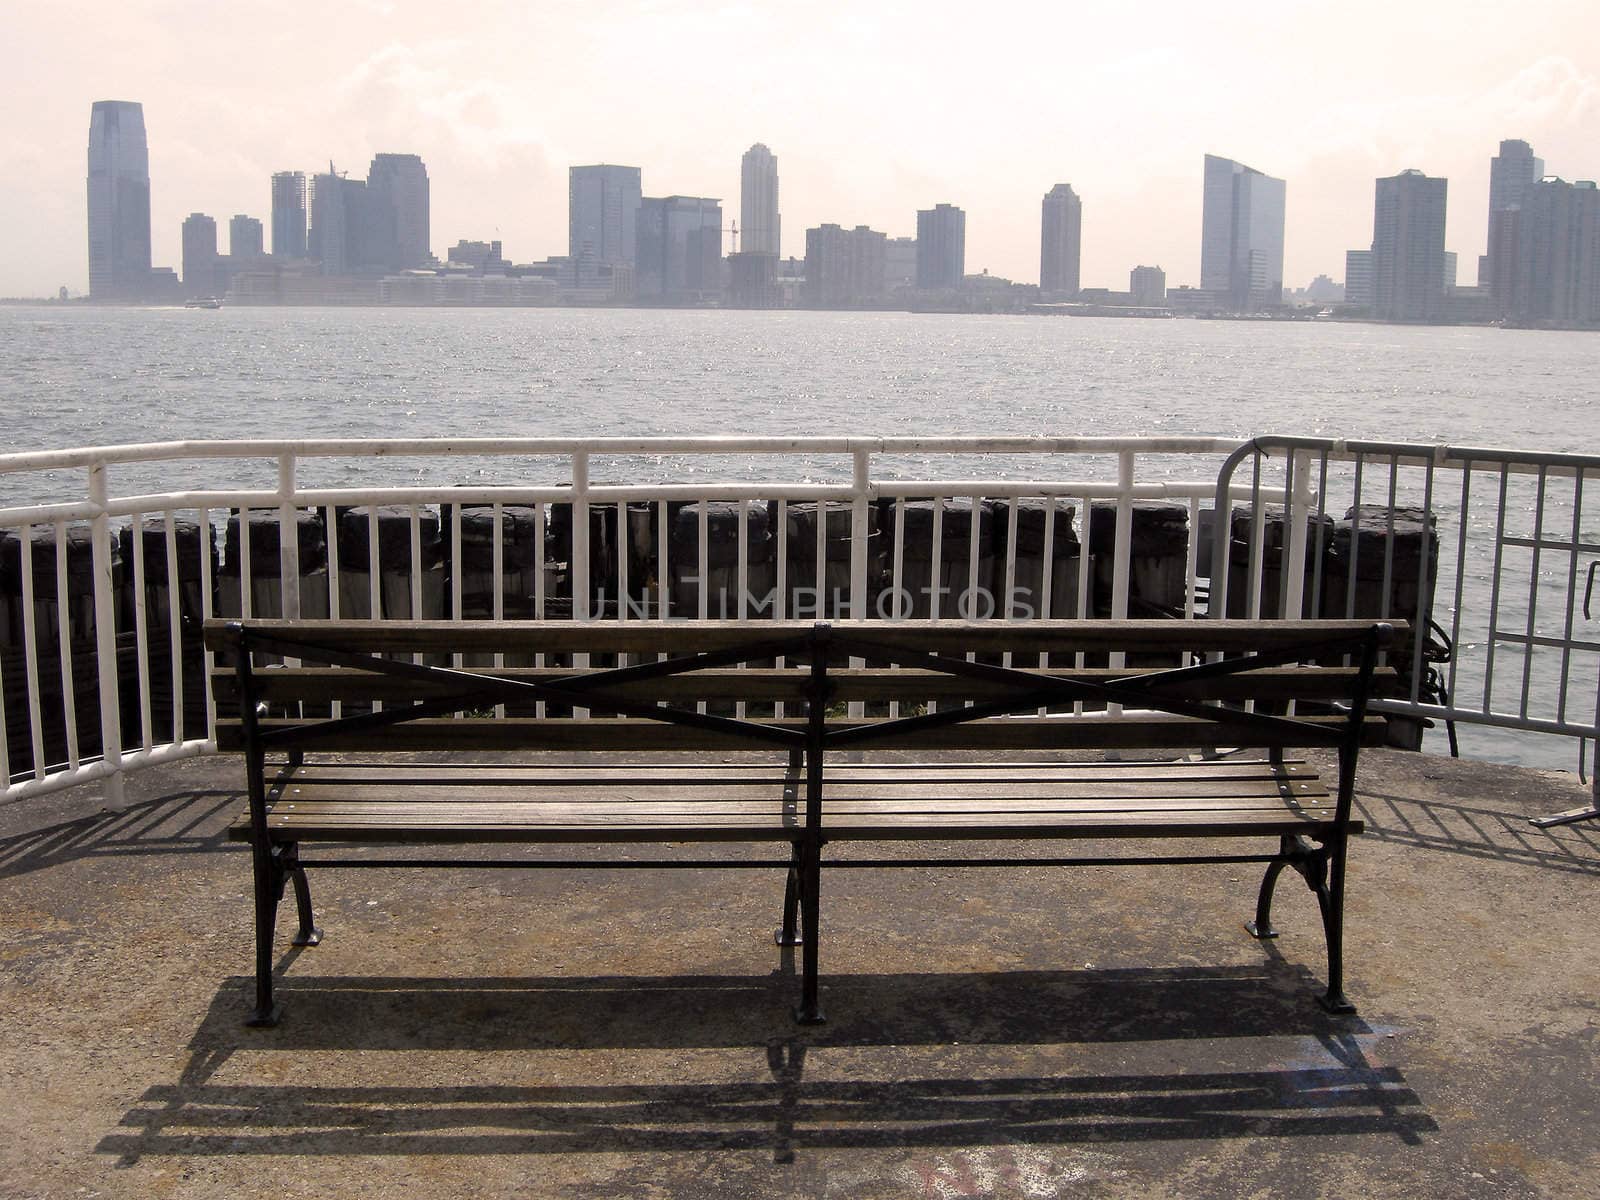 jersey city viewed from Manhattan, wooden bench in foreground